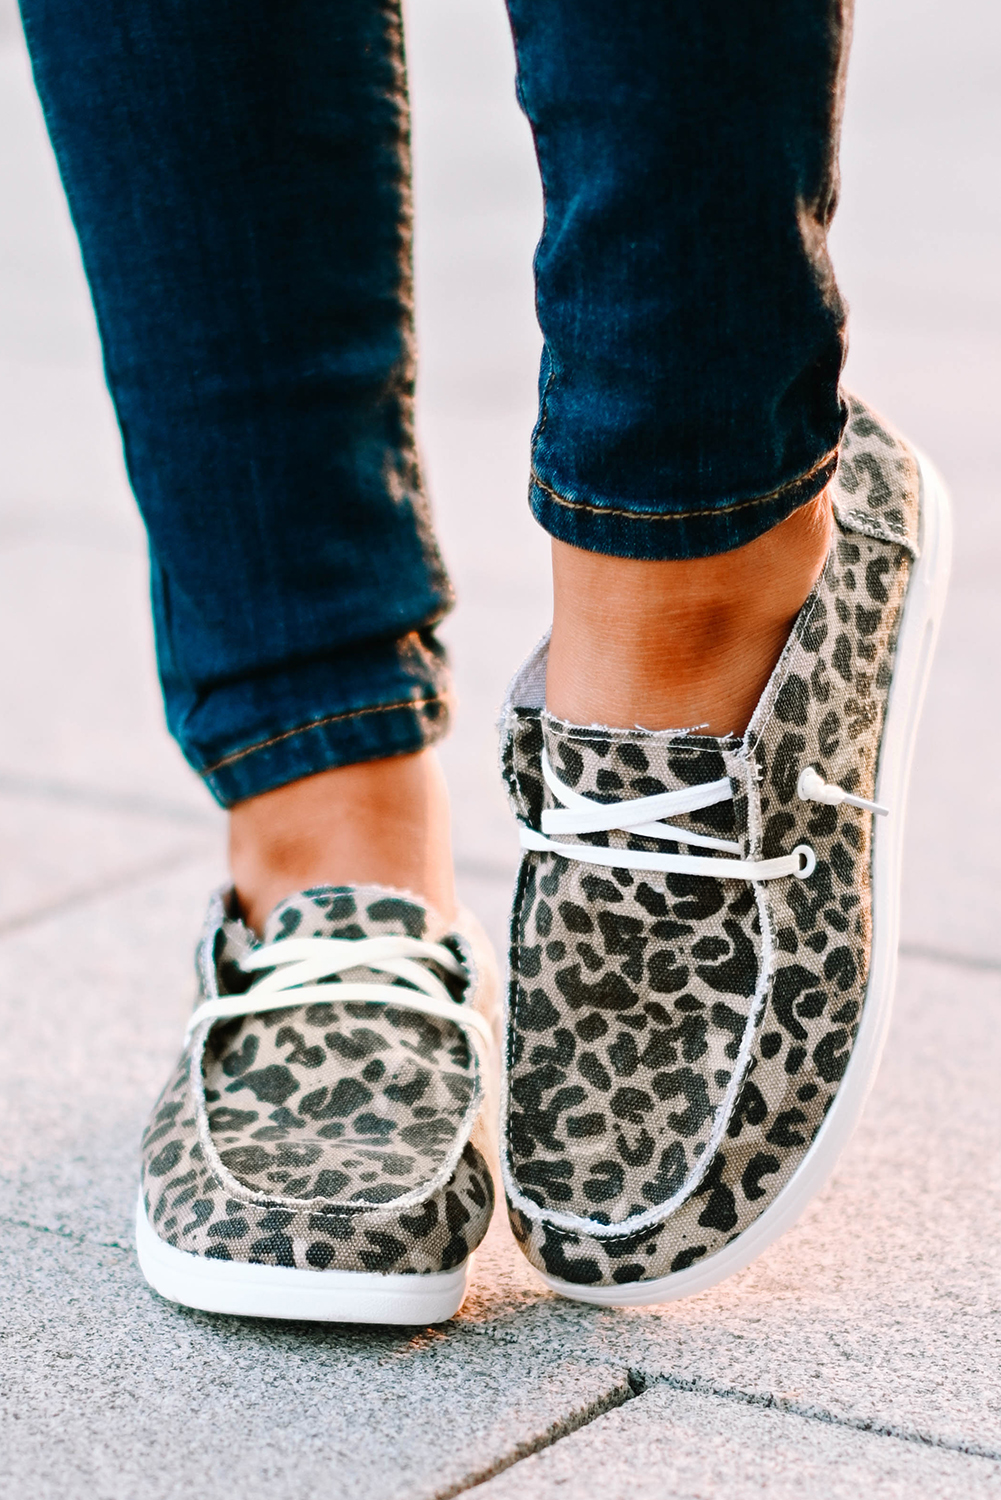 Us 6 88 Drop Shipping Leopard Slip On Flat Canvas Shoes For Women